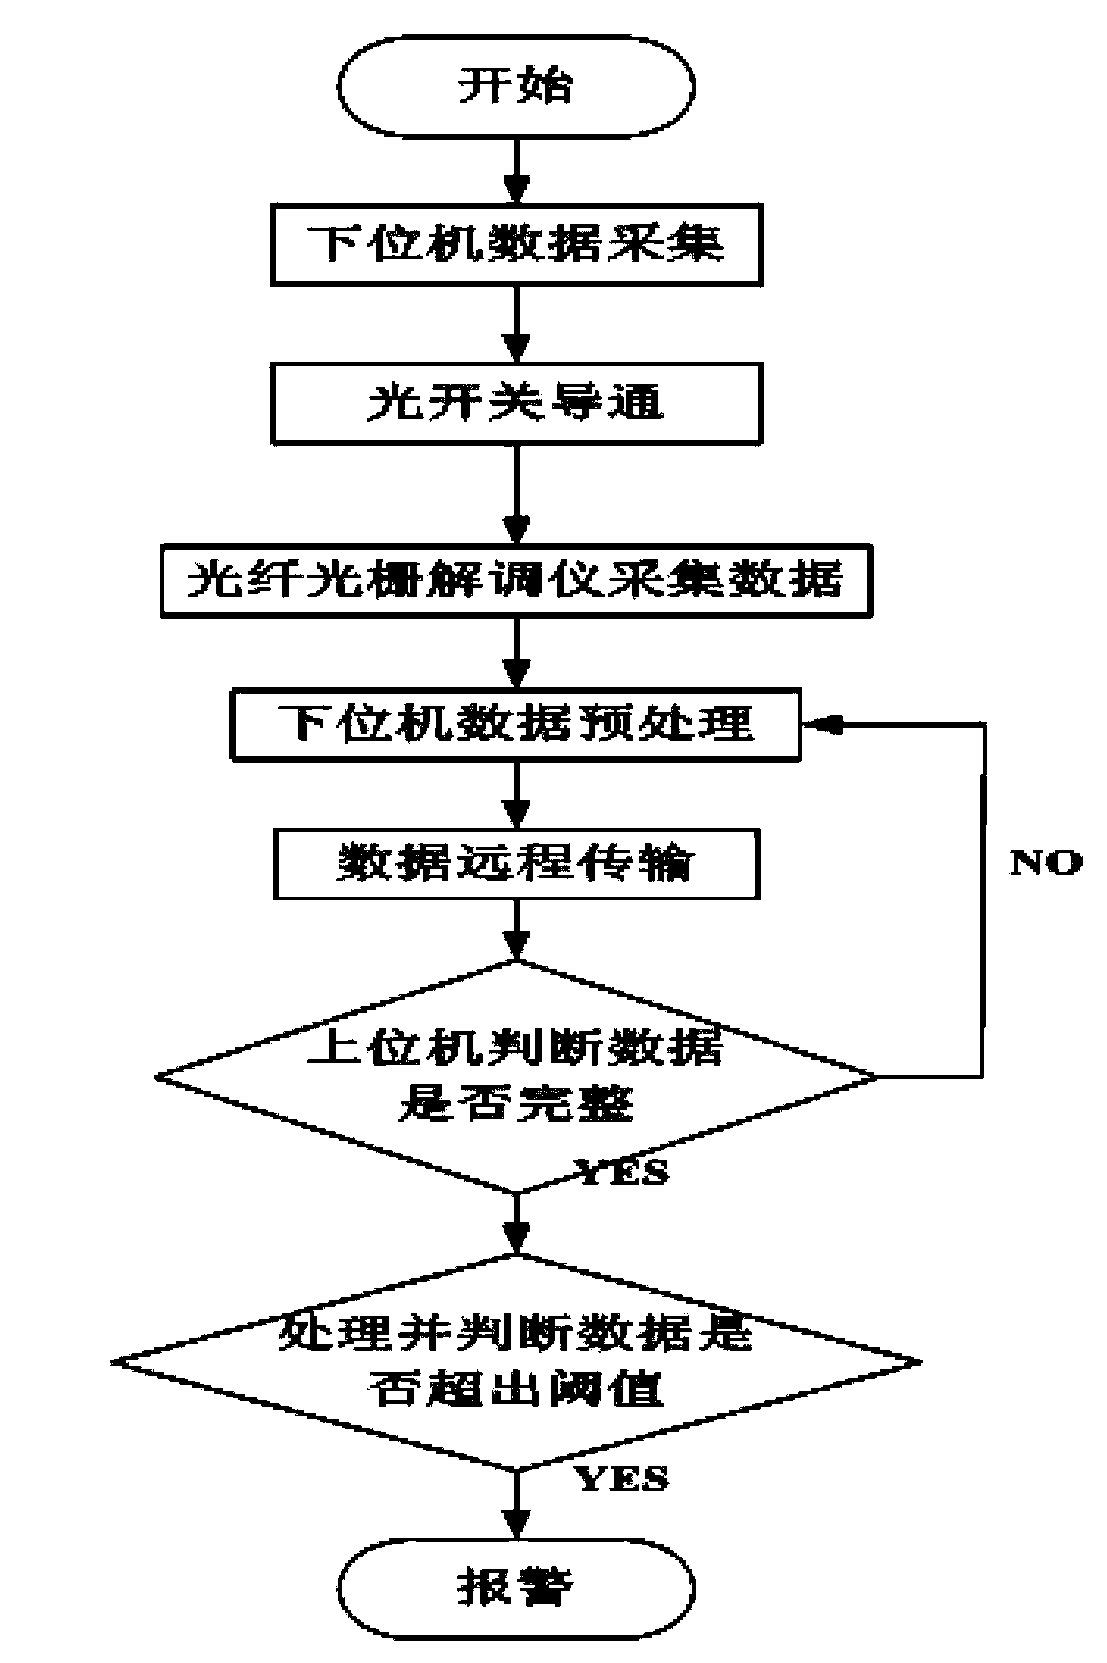 Freeze soil area oil and gas pipeline monitoring method and system and construction method of system